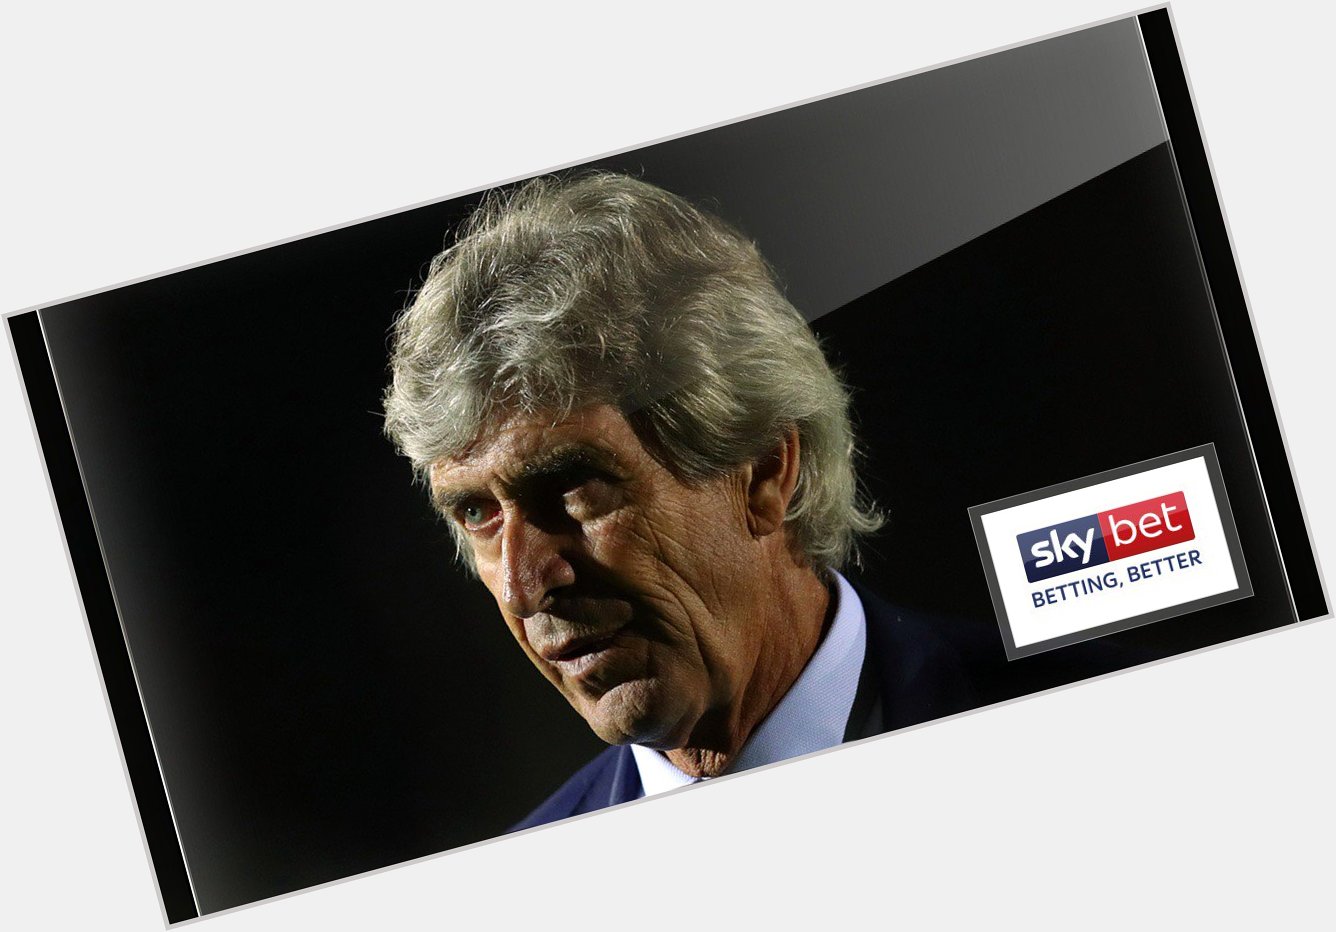  First win of the campaign. Happy Birthday Manuel Pellegrini. 